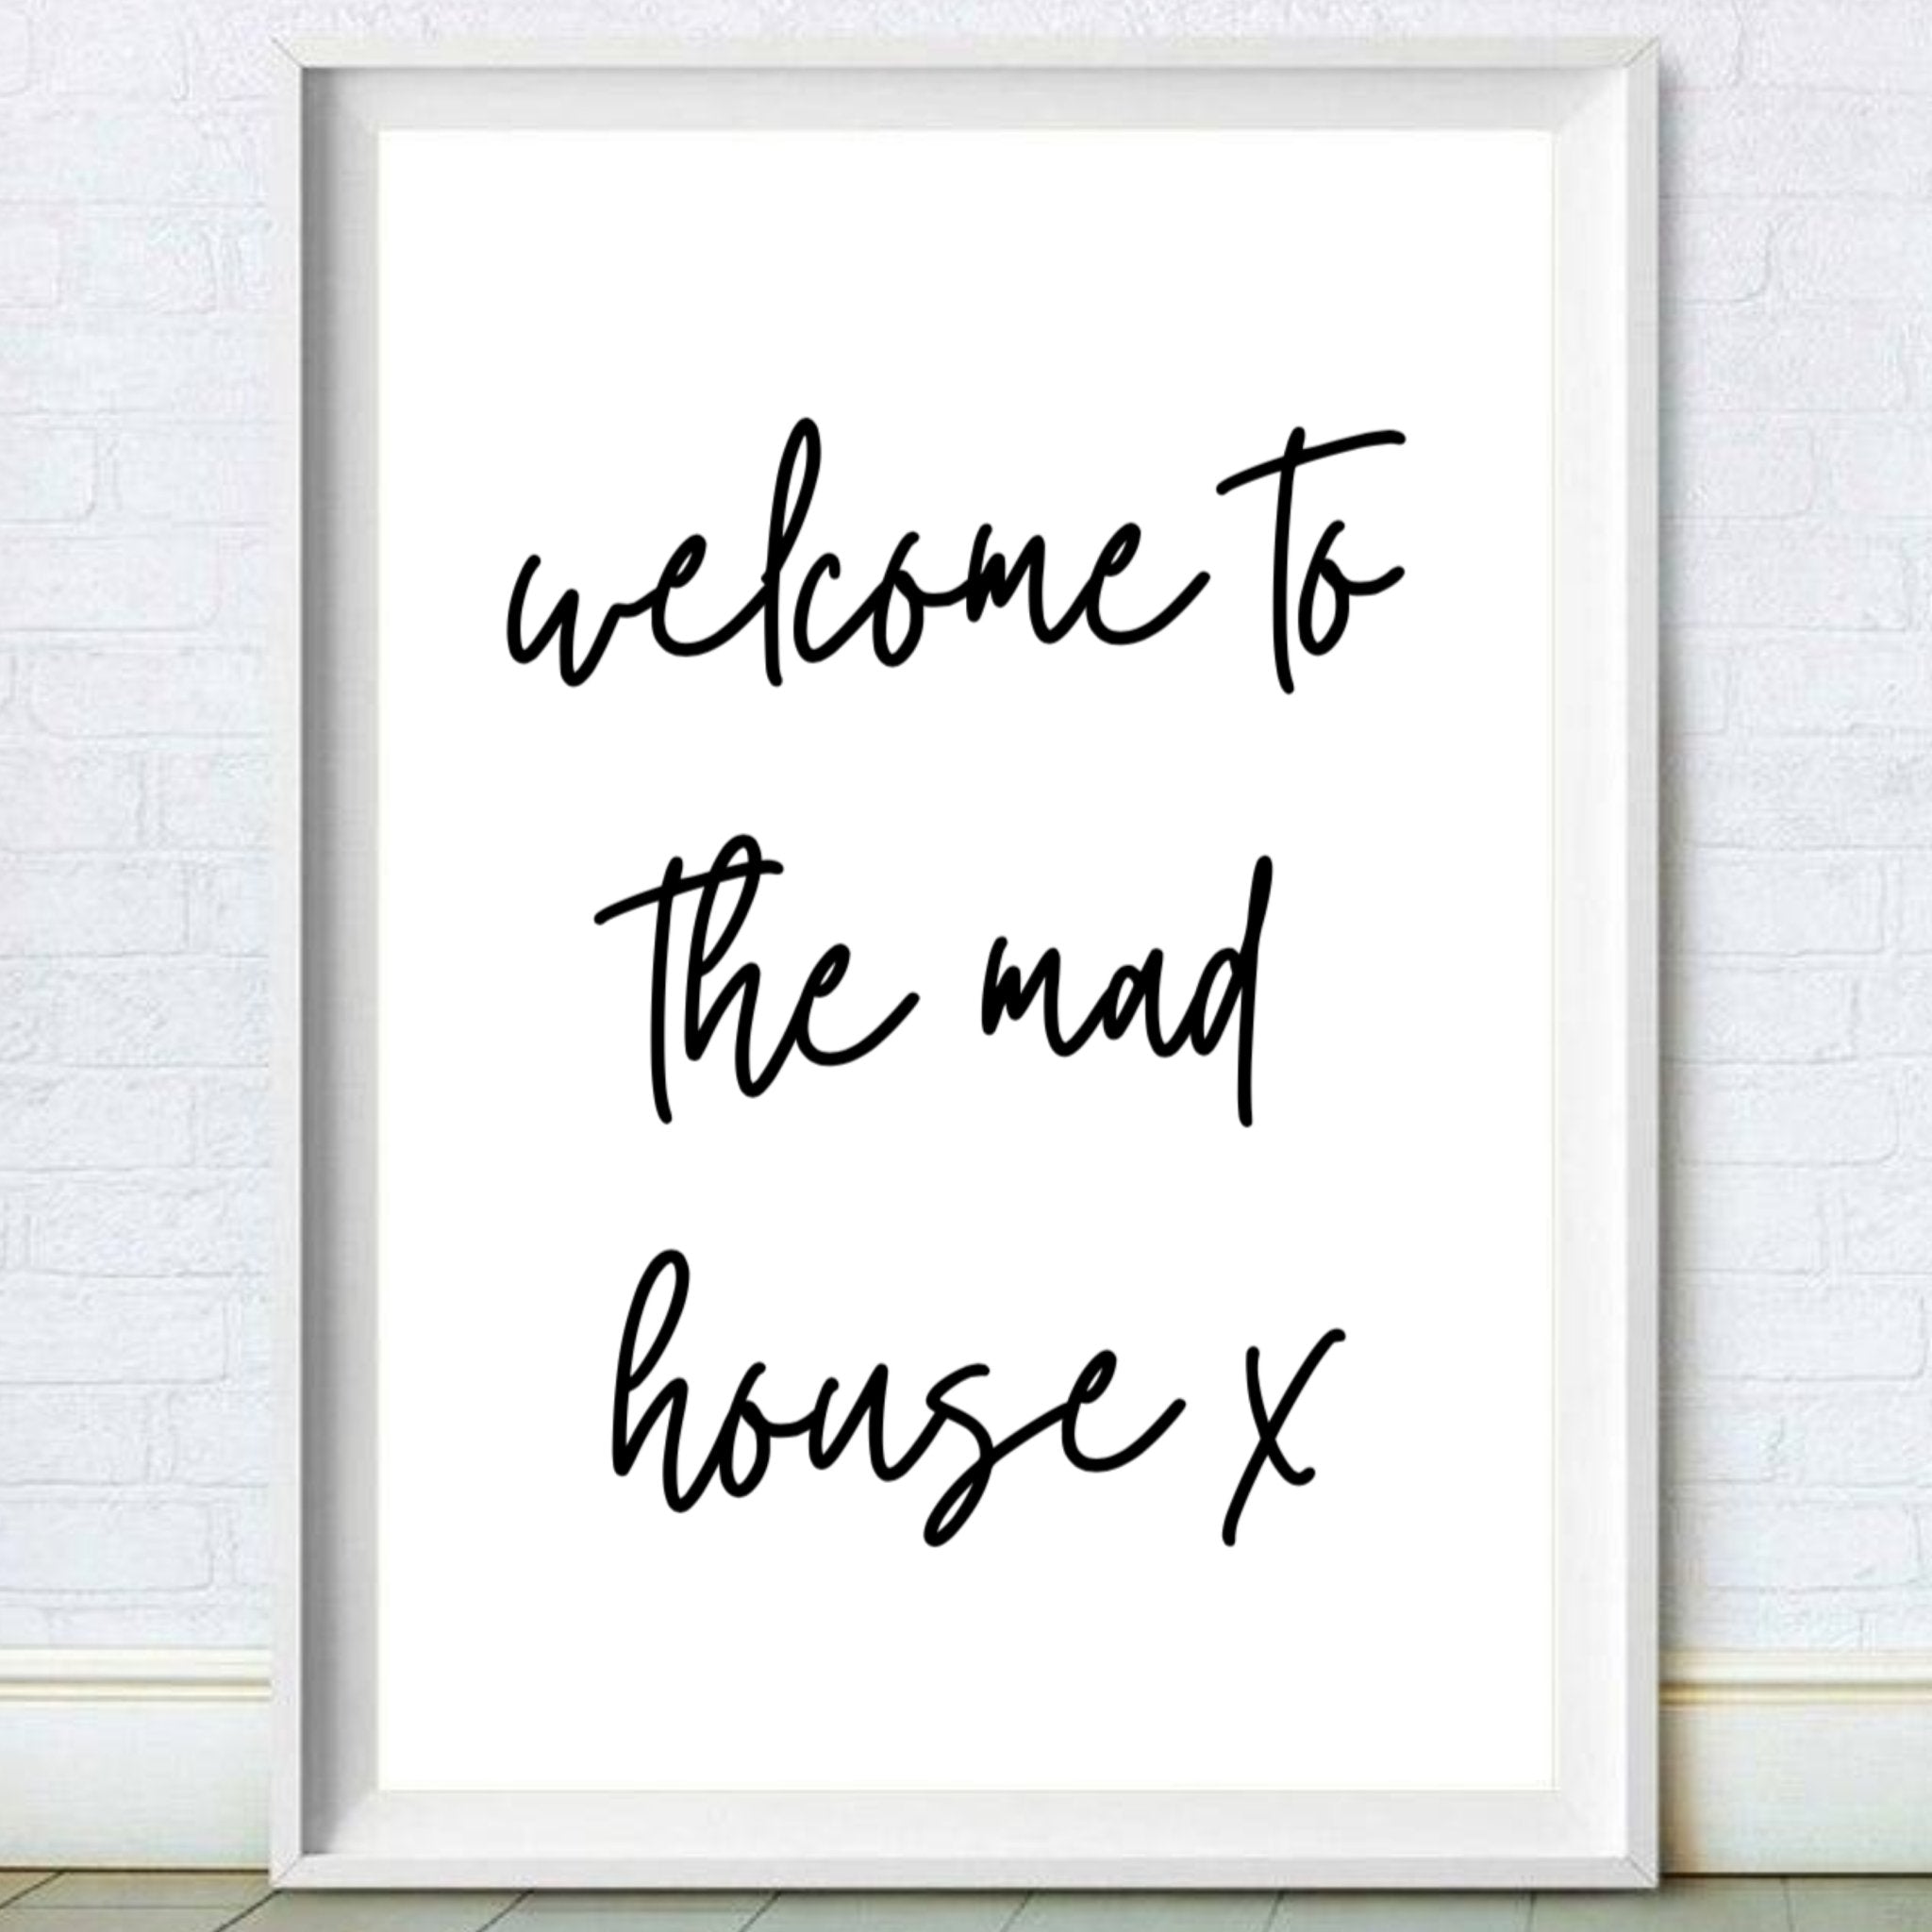 Welcome To The Mad House Print